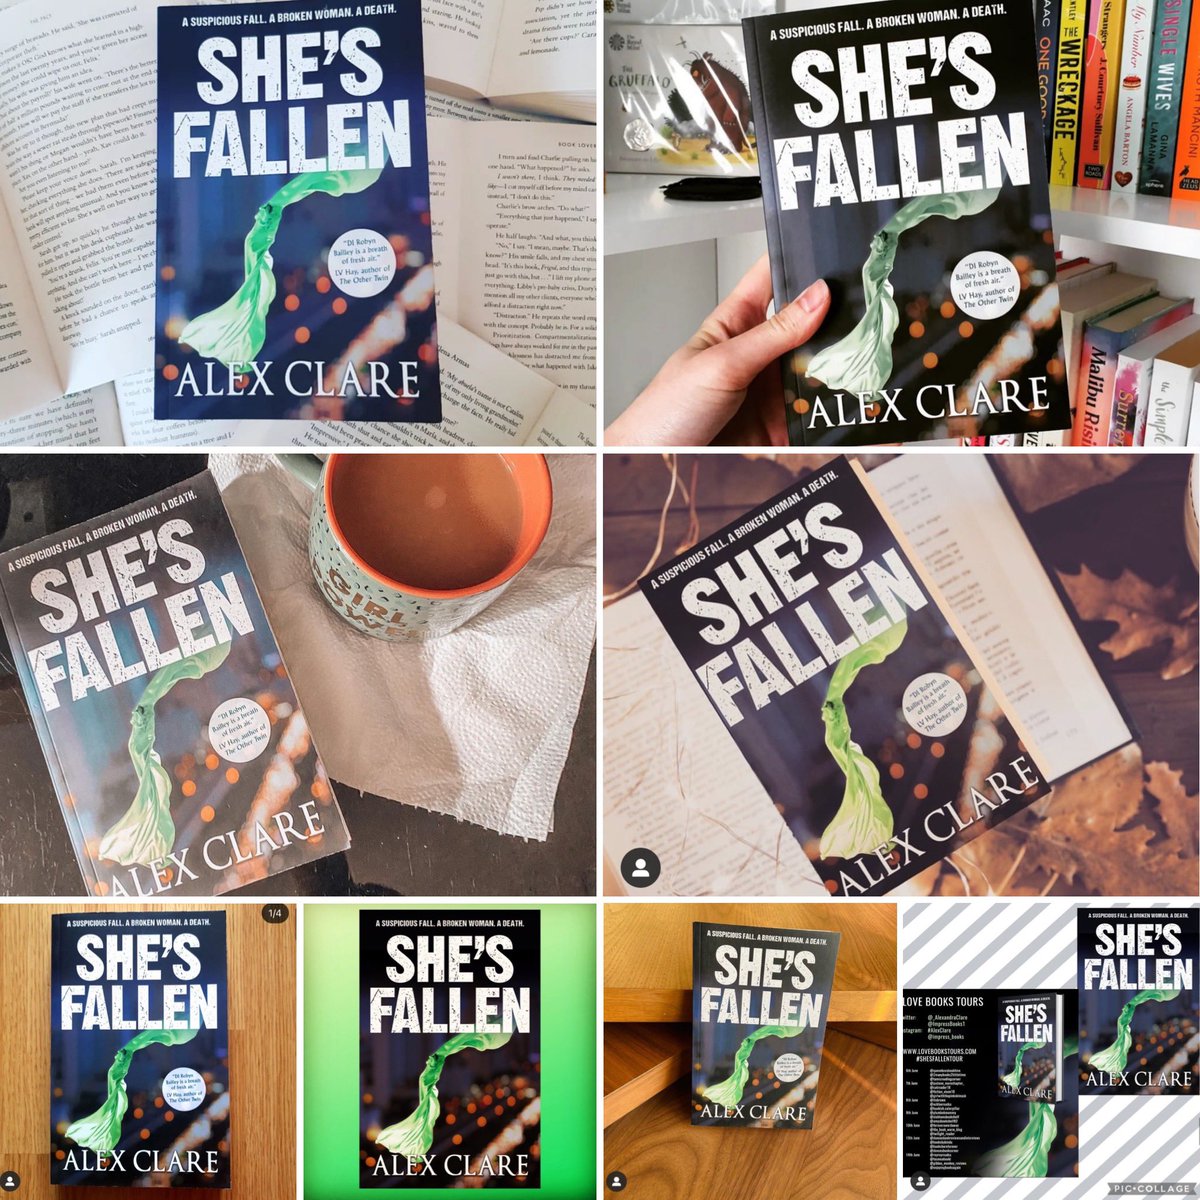 A big thank you to all the lovely reviewers who took part in the She’s Fallen book tour recently. It seems everyone enjoyed this book just as much as the first with lots of outstanding reviews and thoughtful comments Thanks to @lovebookstours once again for organising.